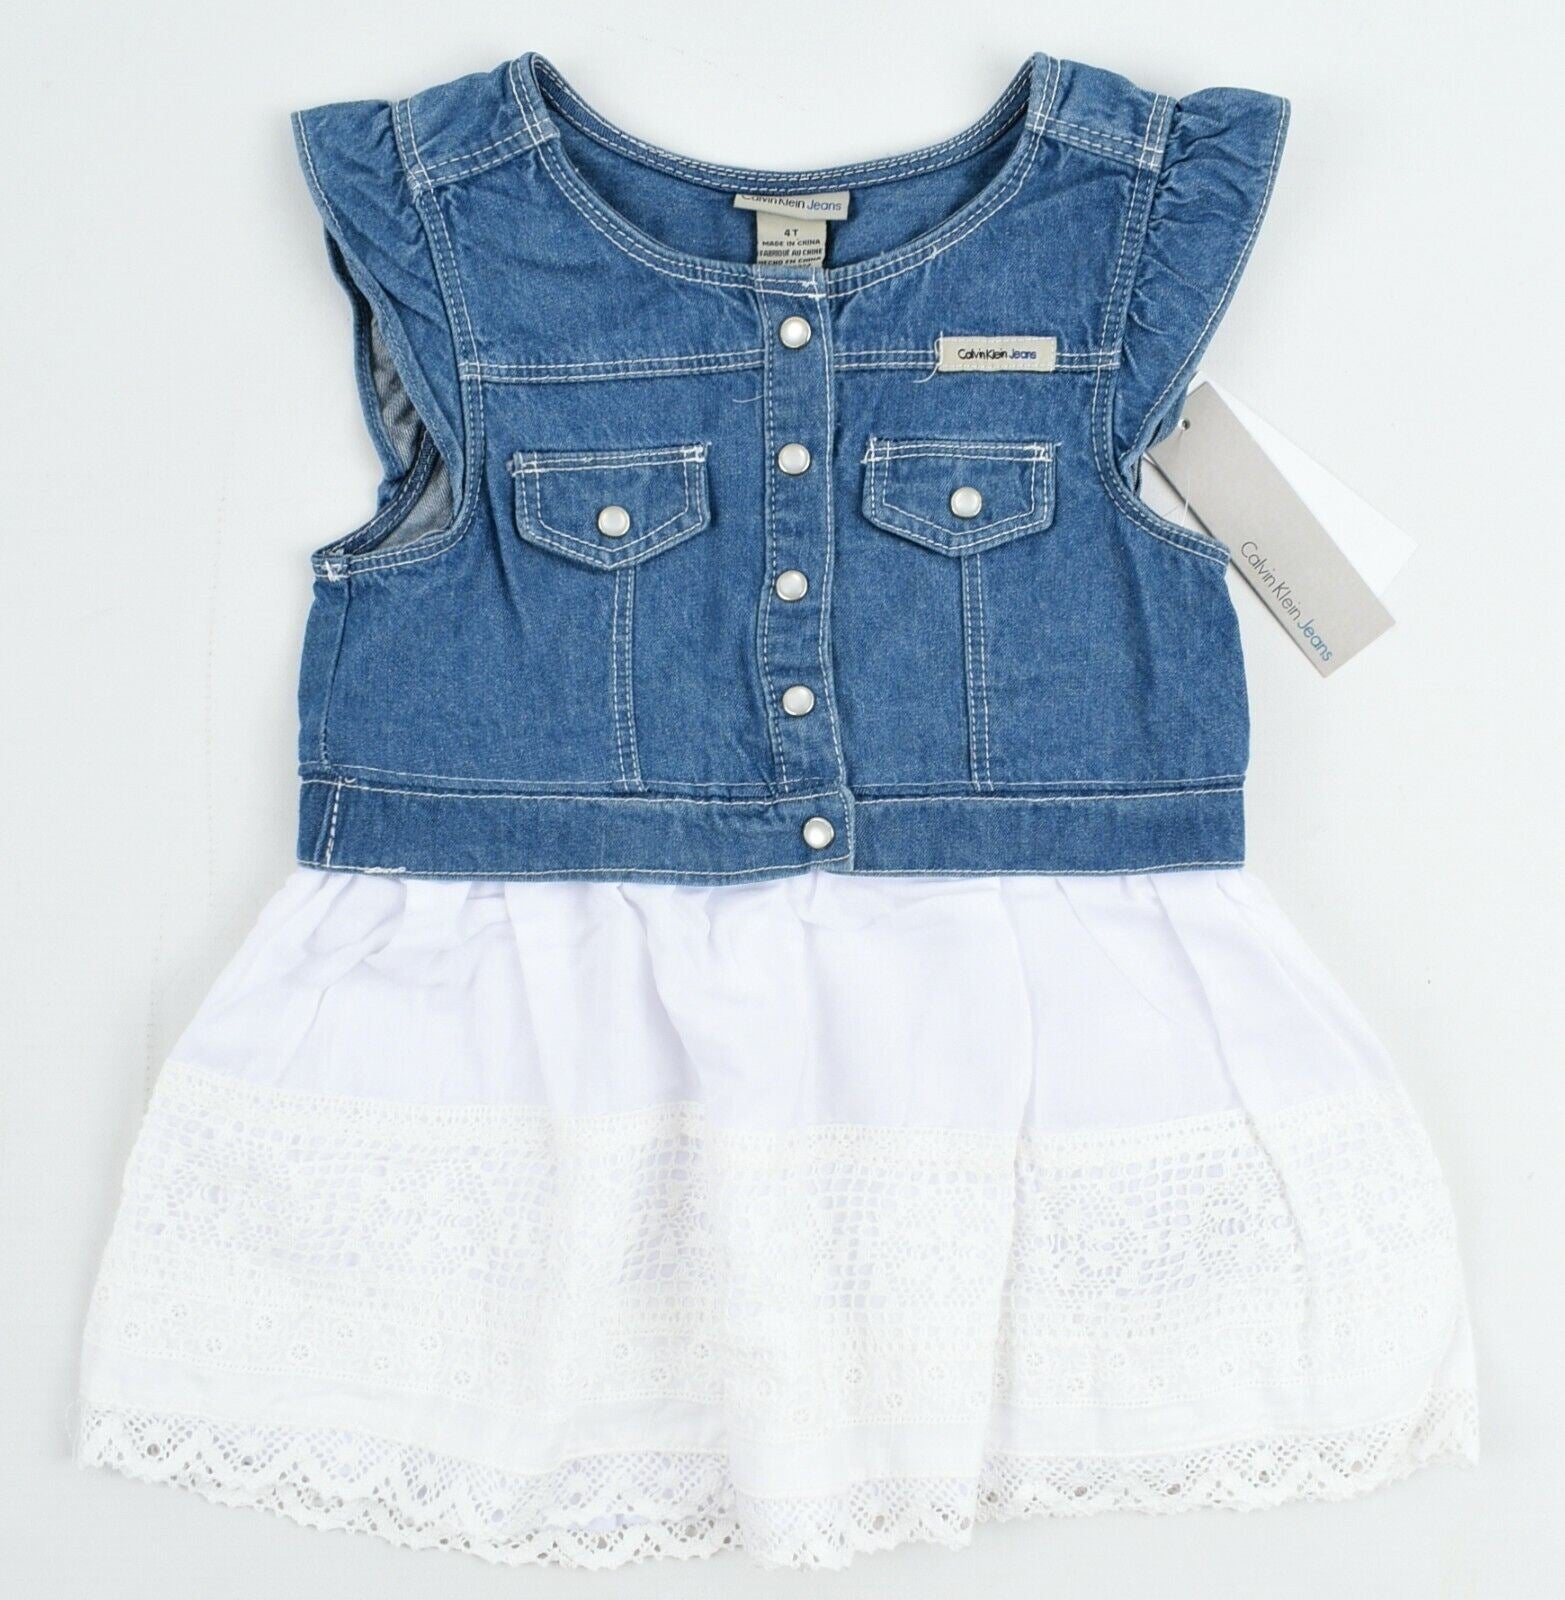 CALVIN KLEIN JEANS Baby Girls' Adorable Dress, Blue/White, size 4 years